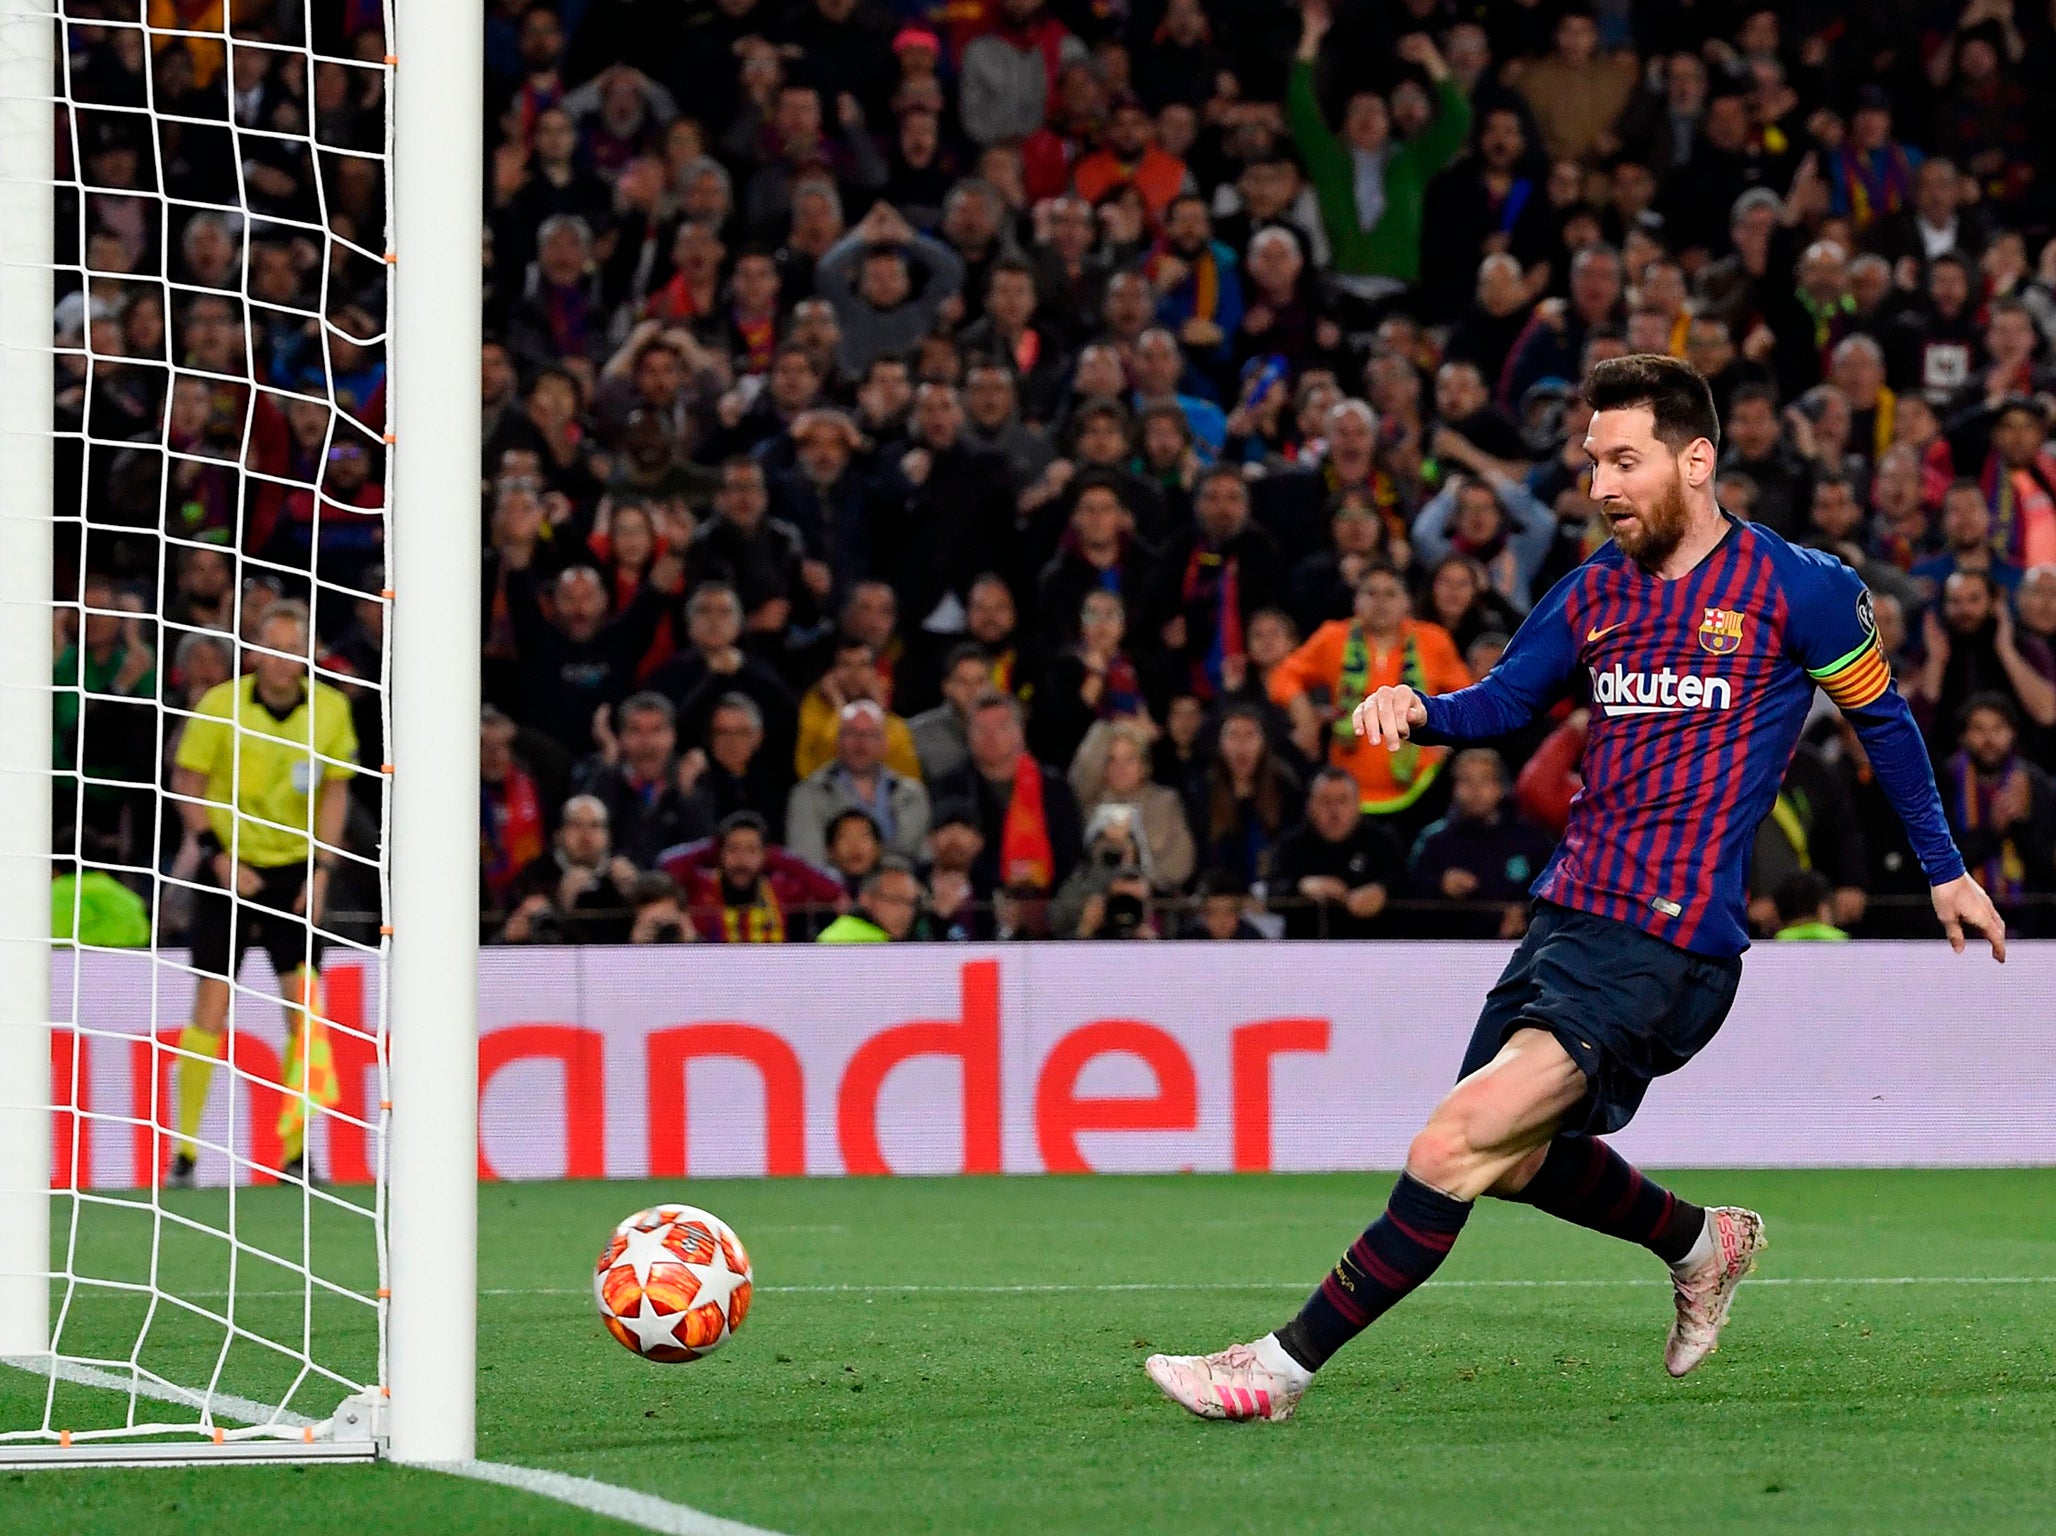 Lionel Messi goal: Watch video as Barcelona captain scores late goal against Liverpool in Champions League